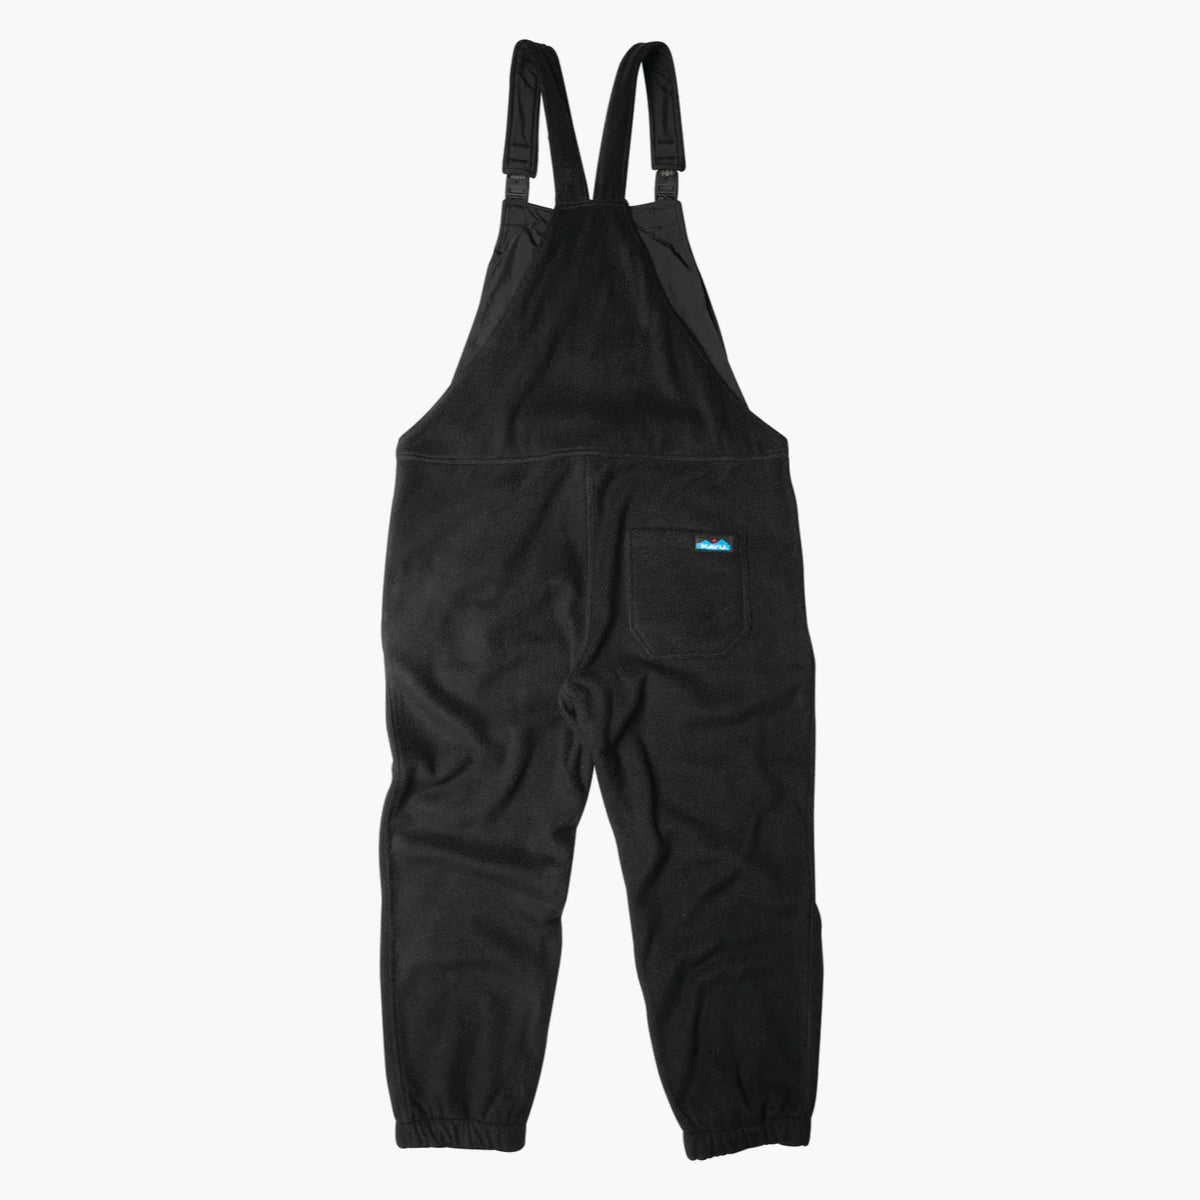 Felted Falls Overall Black